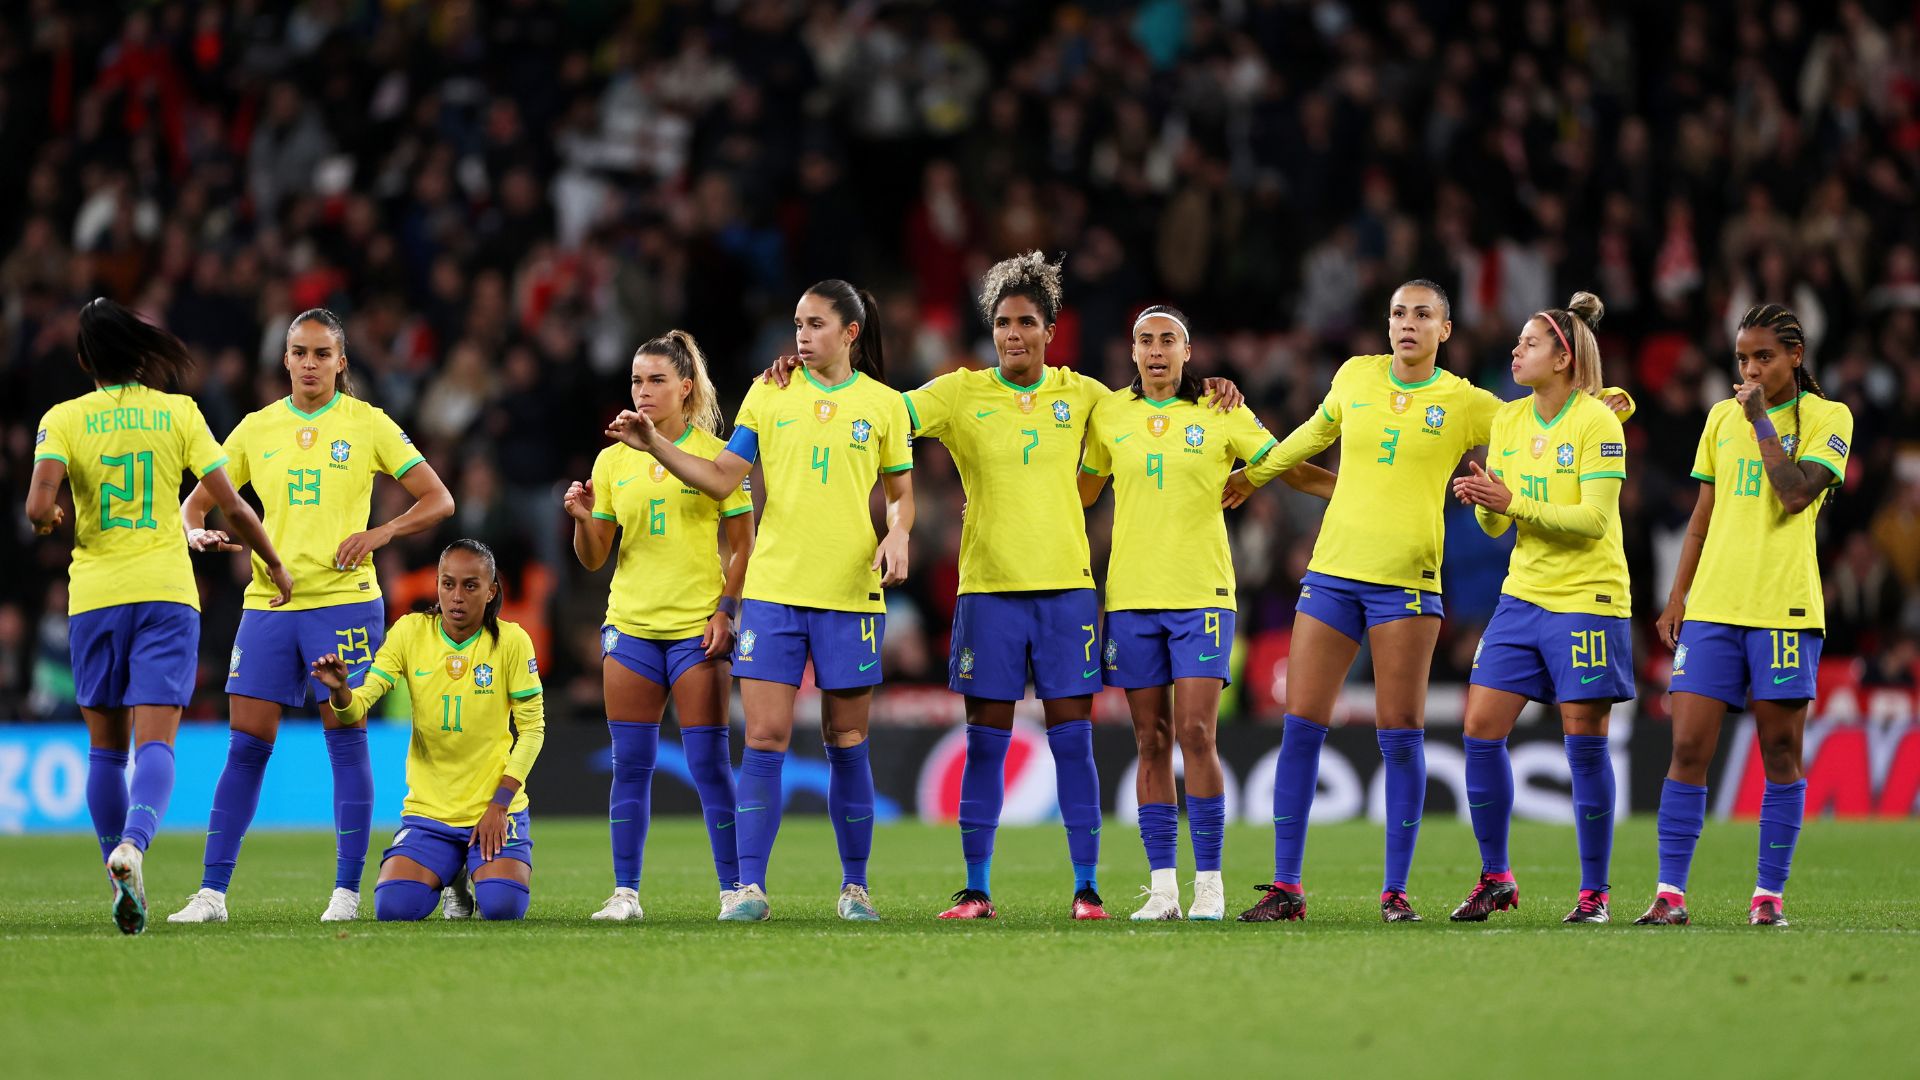 Brazil team prepares for the Women's World Cup